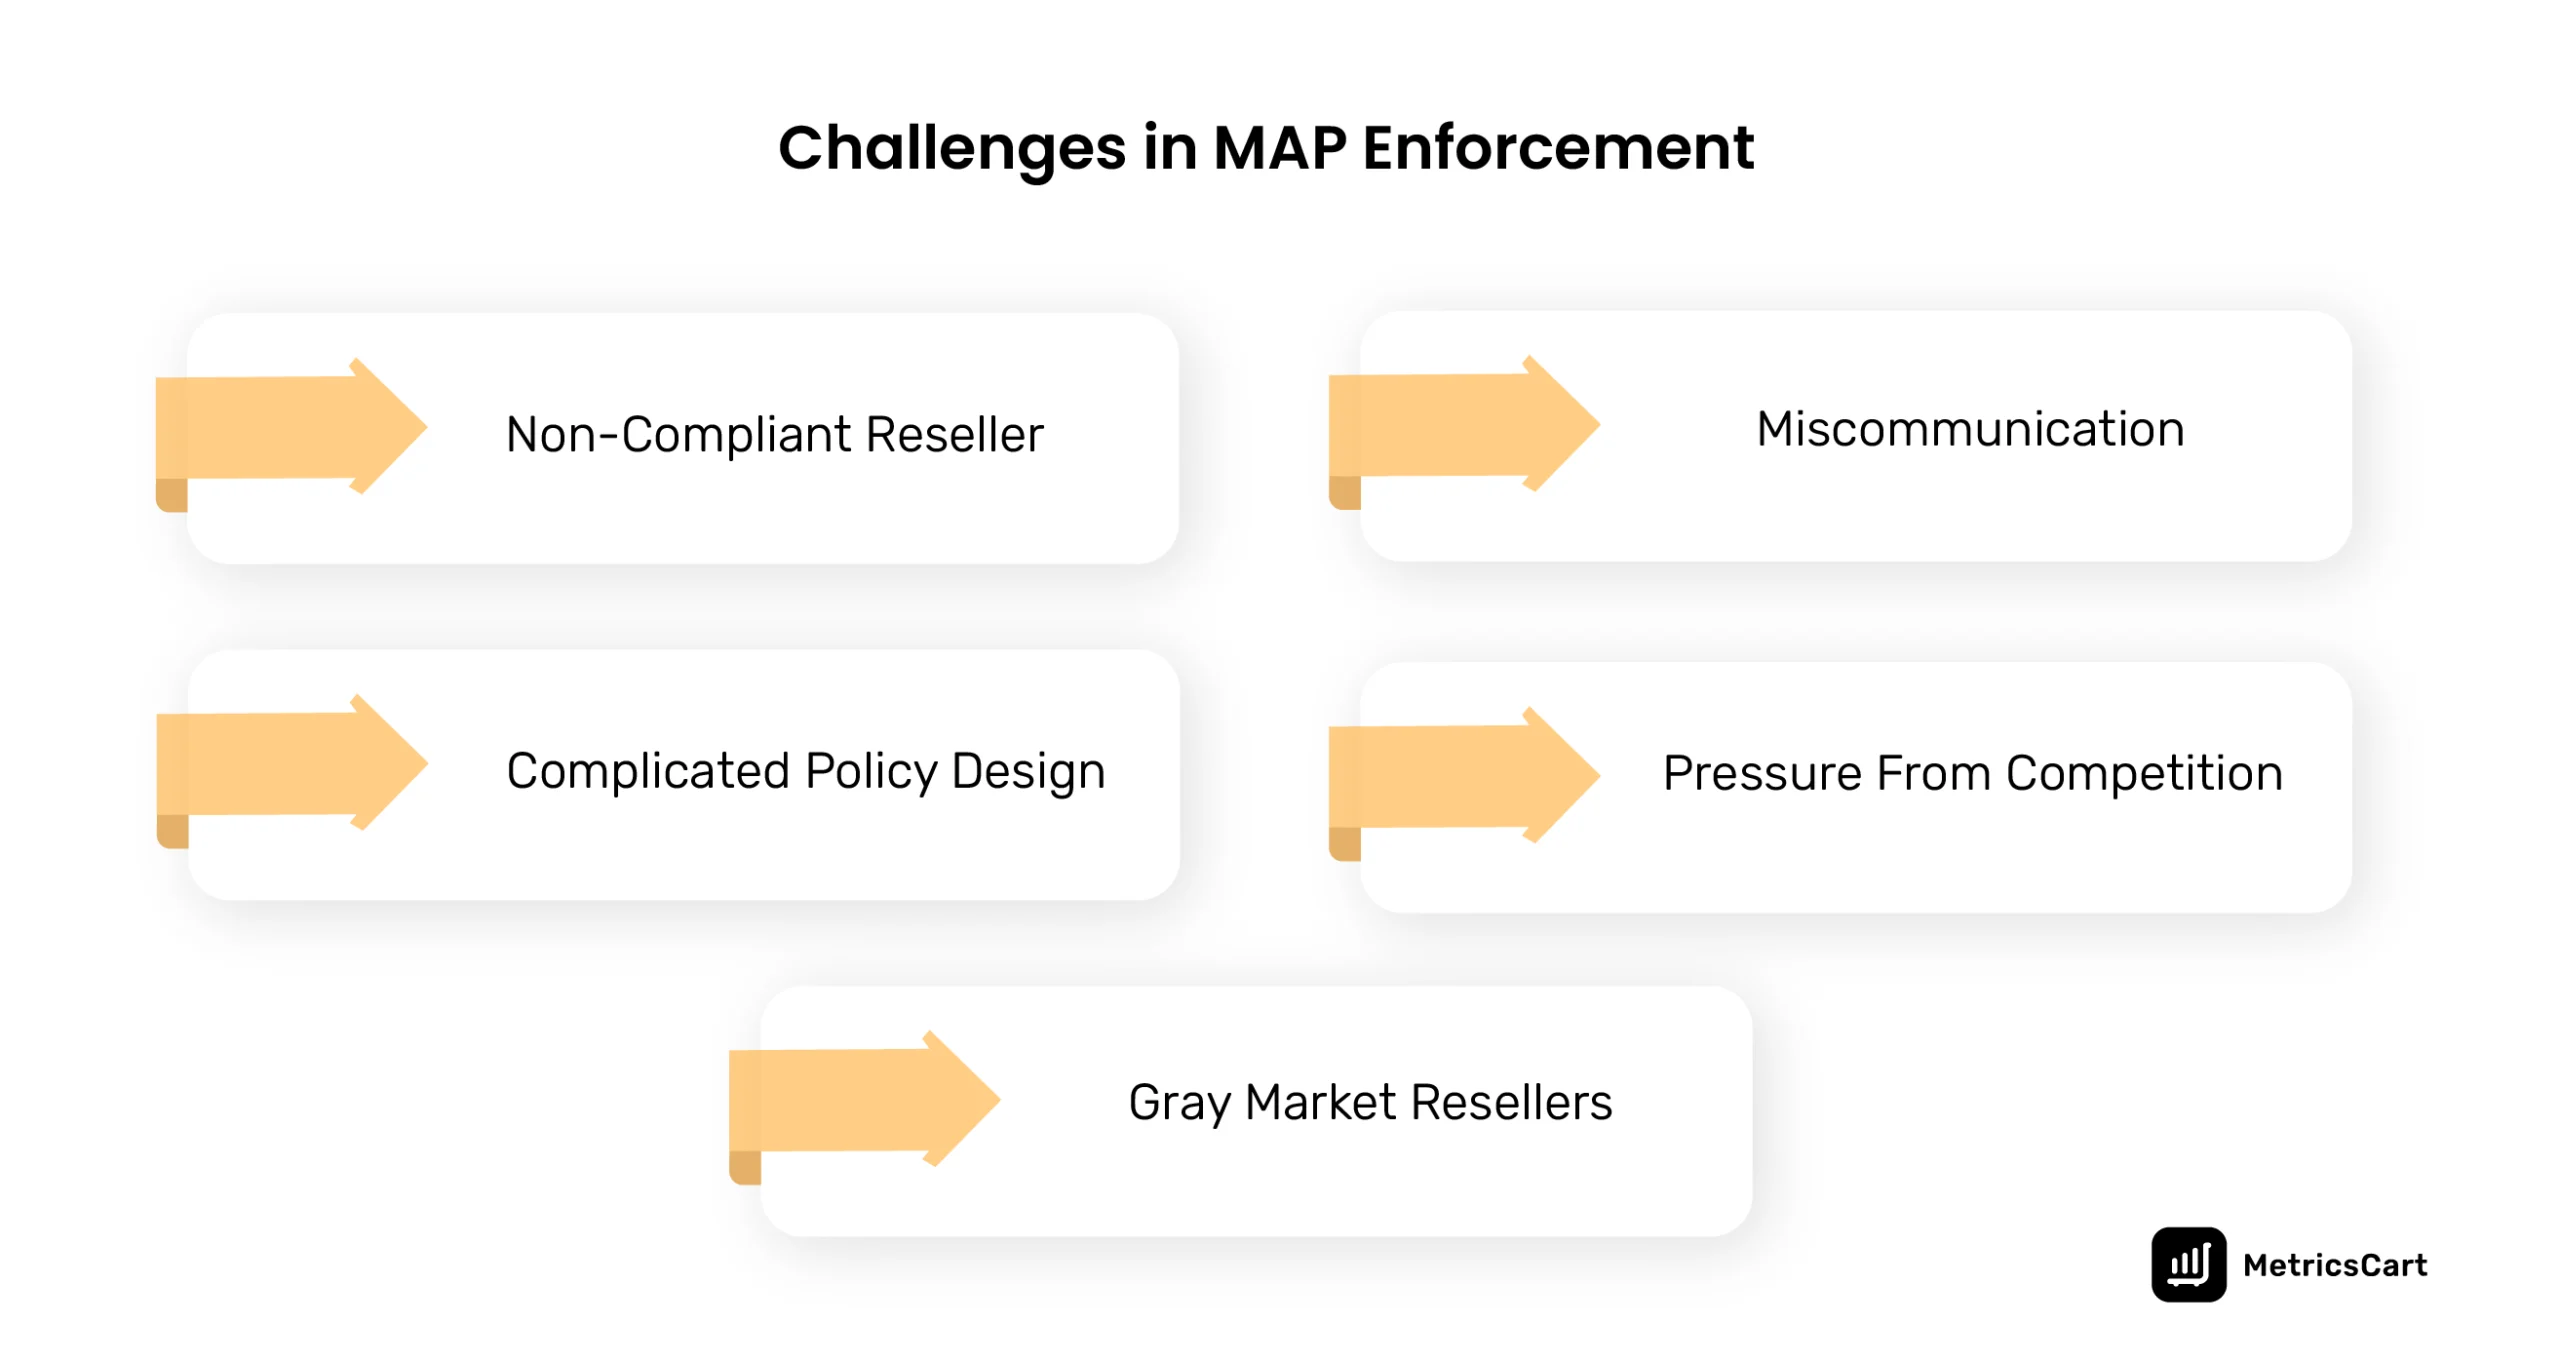 Five challenges commonly faced by brands while enforcing MAP policy.